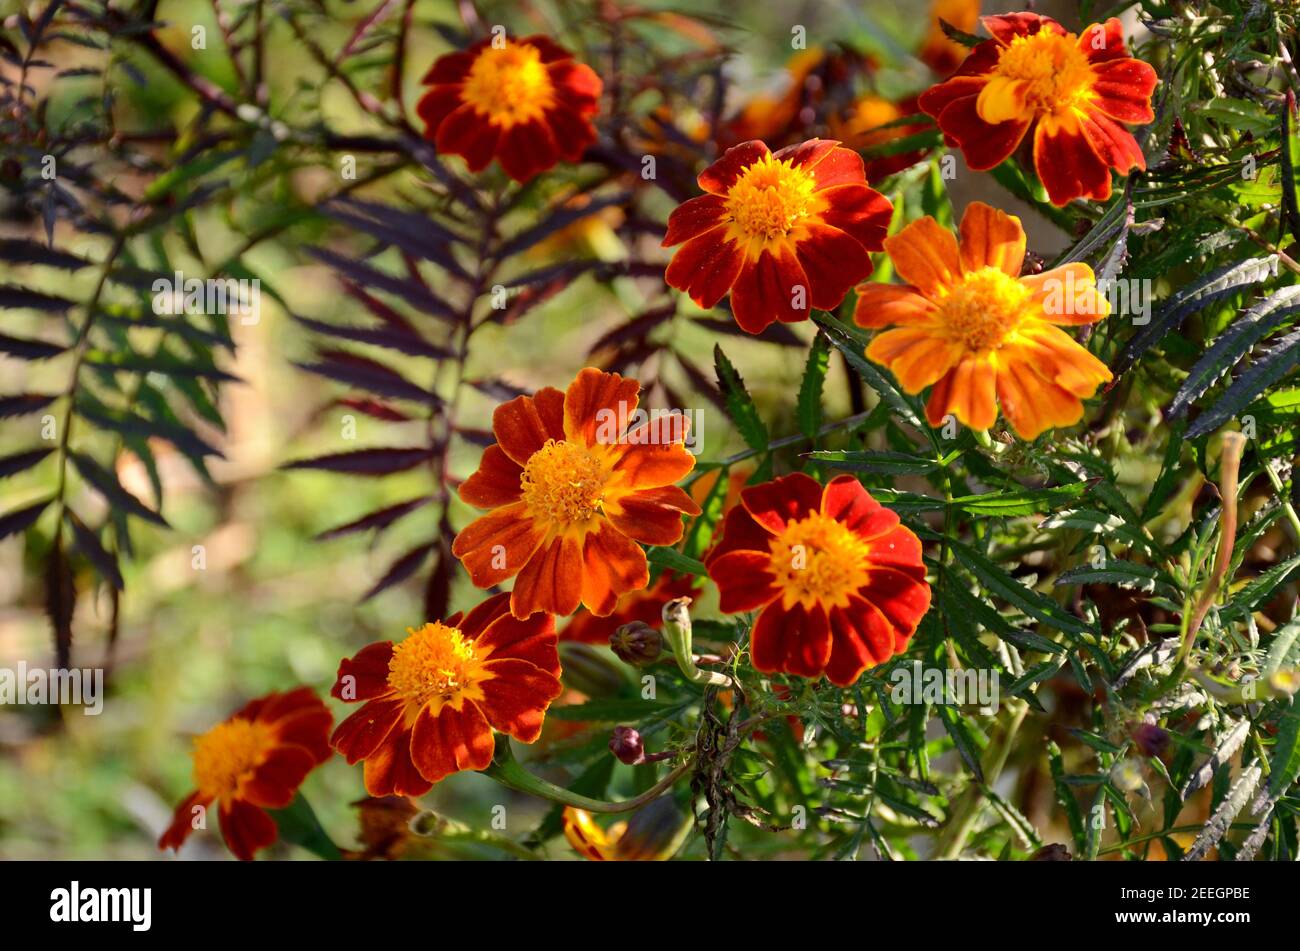 Bunch the red yellow marigold flower with leaves in the garden. Stock Photo